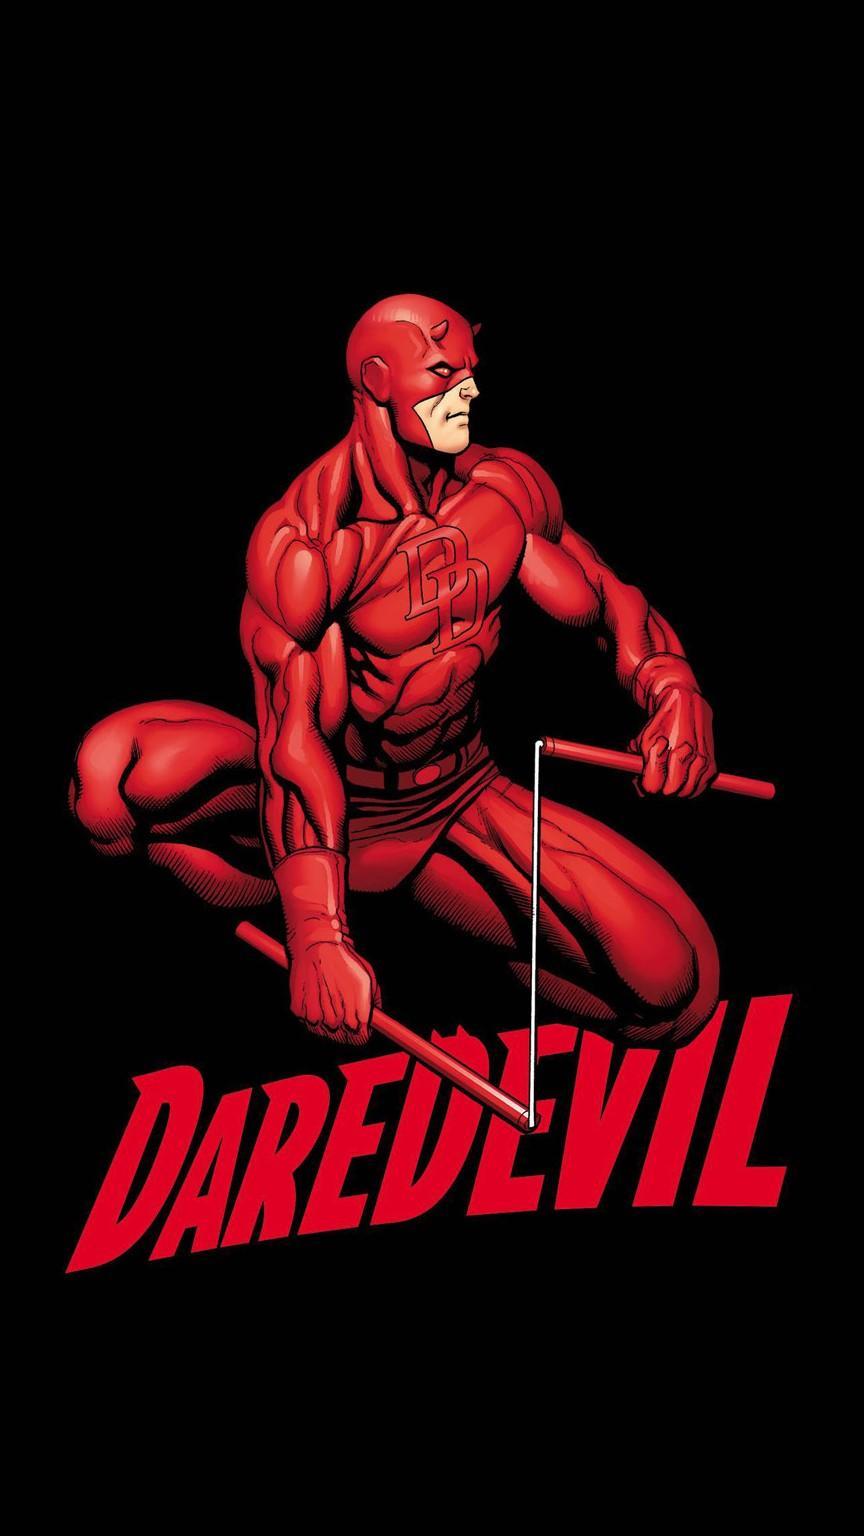 Daredevil HD Wallpaper for Android